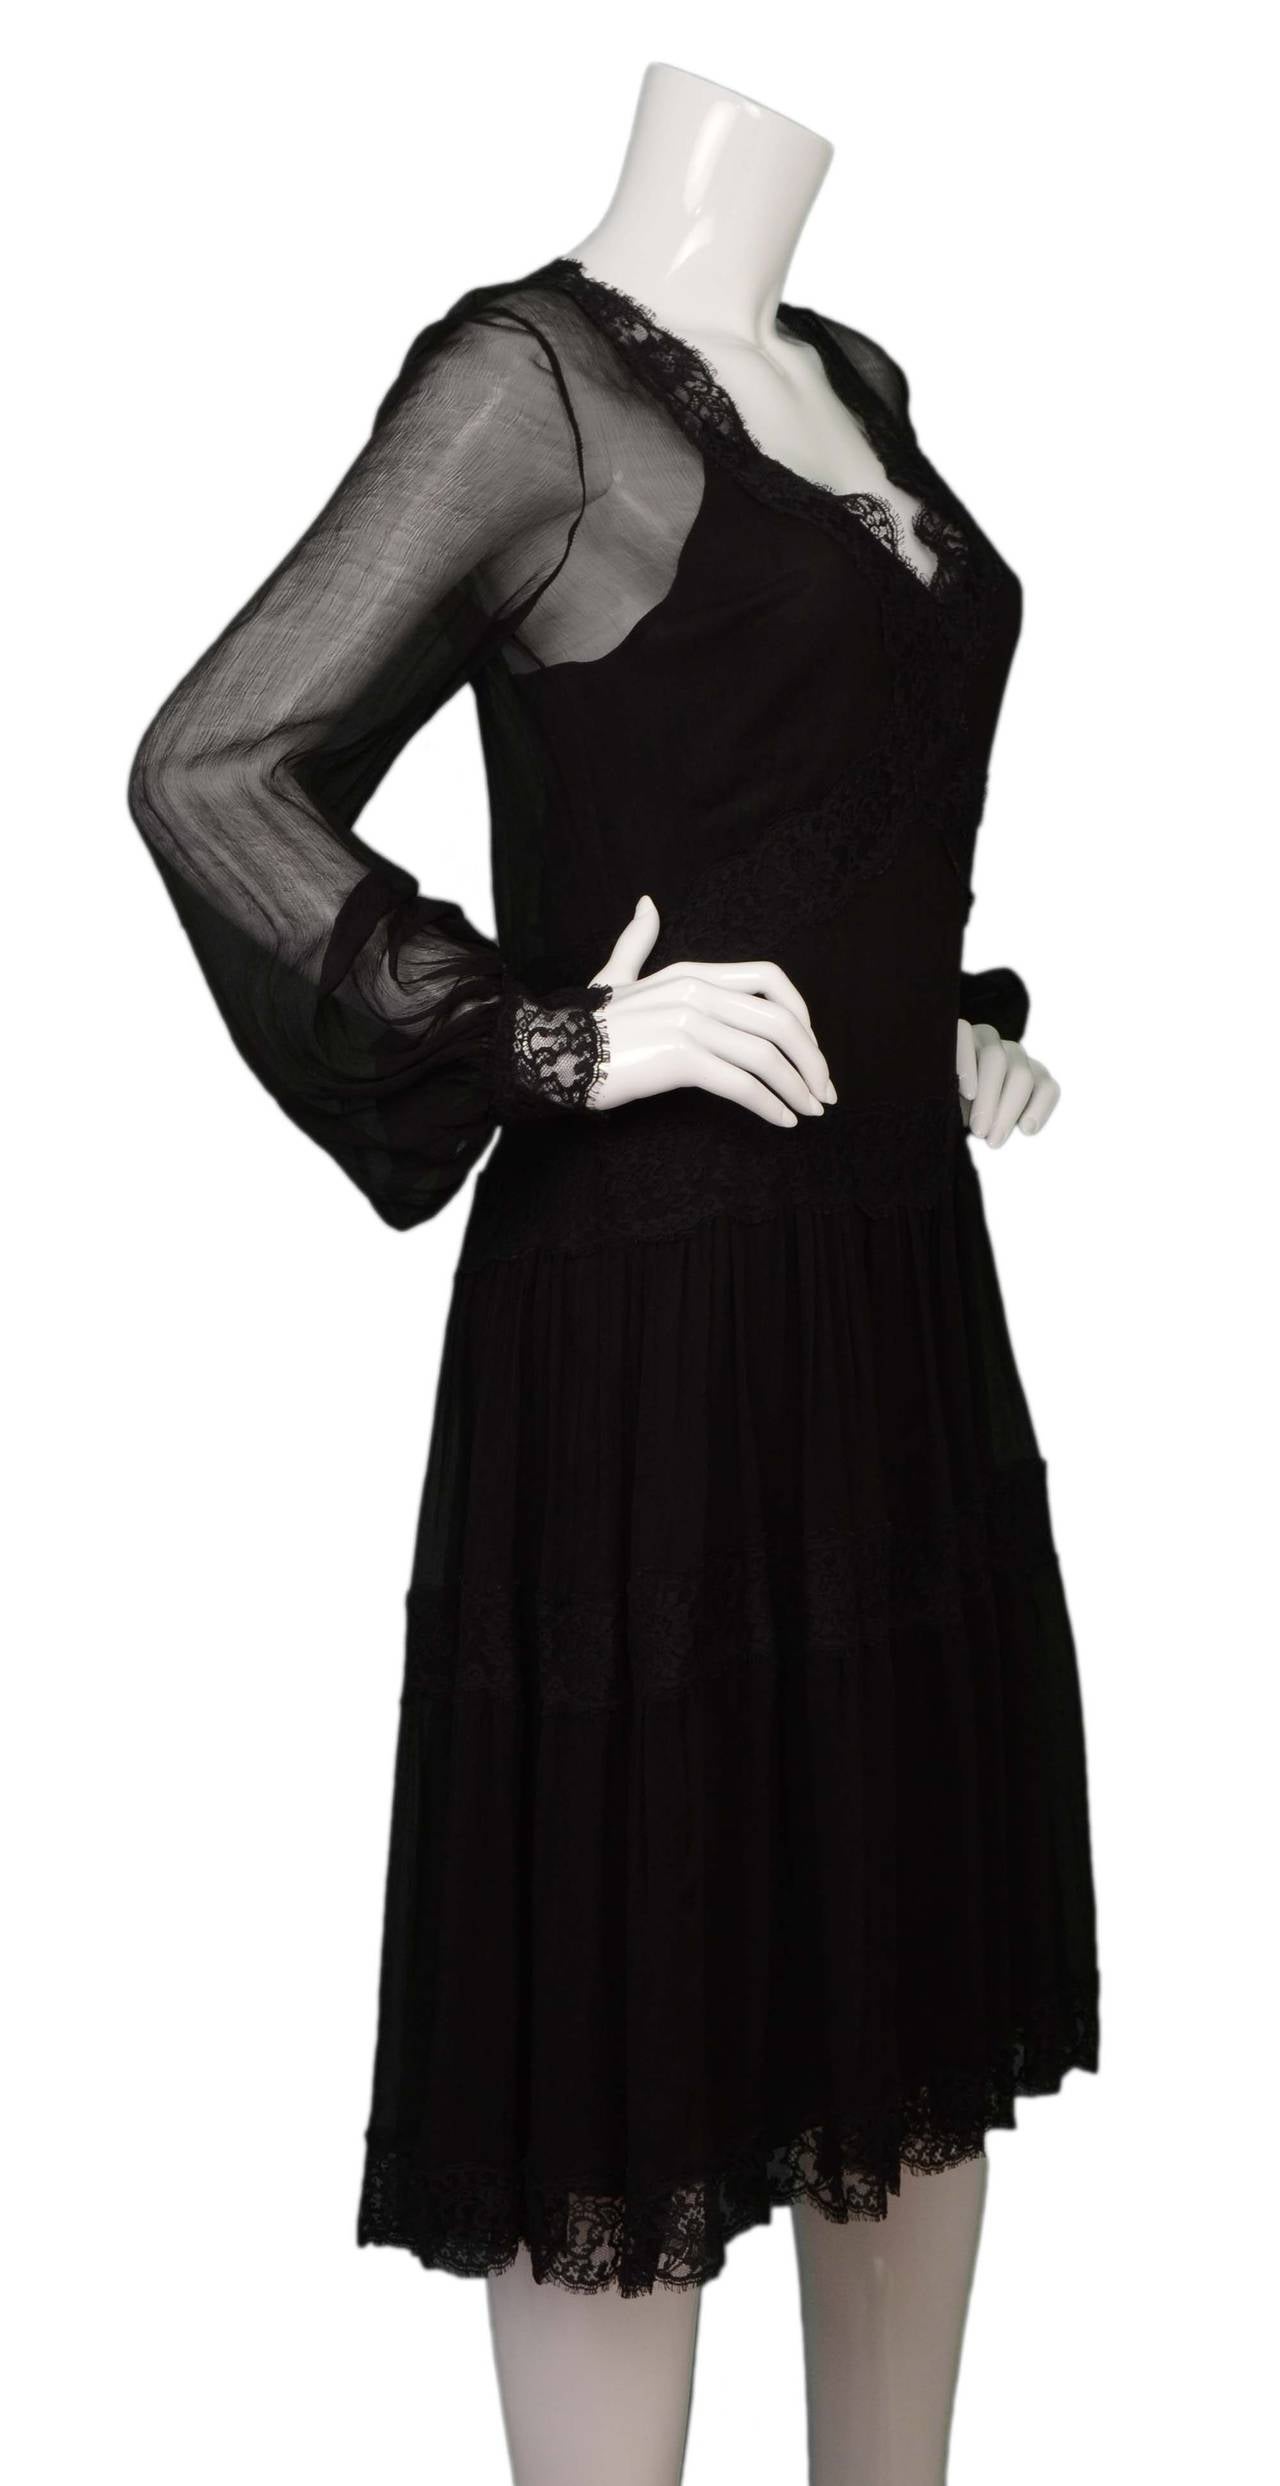 Oscar De La Renta Black Chiffon & Lace Smock Dress
Features lace trim throughout
Made in: Not given- believed to be Italy
Color: Black
Composition: Not given- believed to be Chiffon with lace trim
Lining: Not given- believed to be black